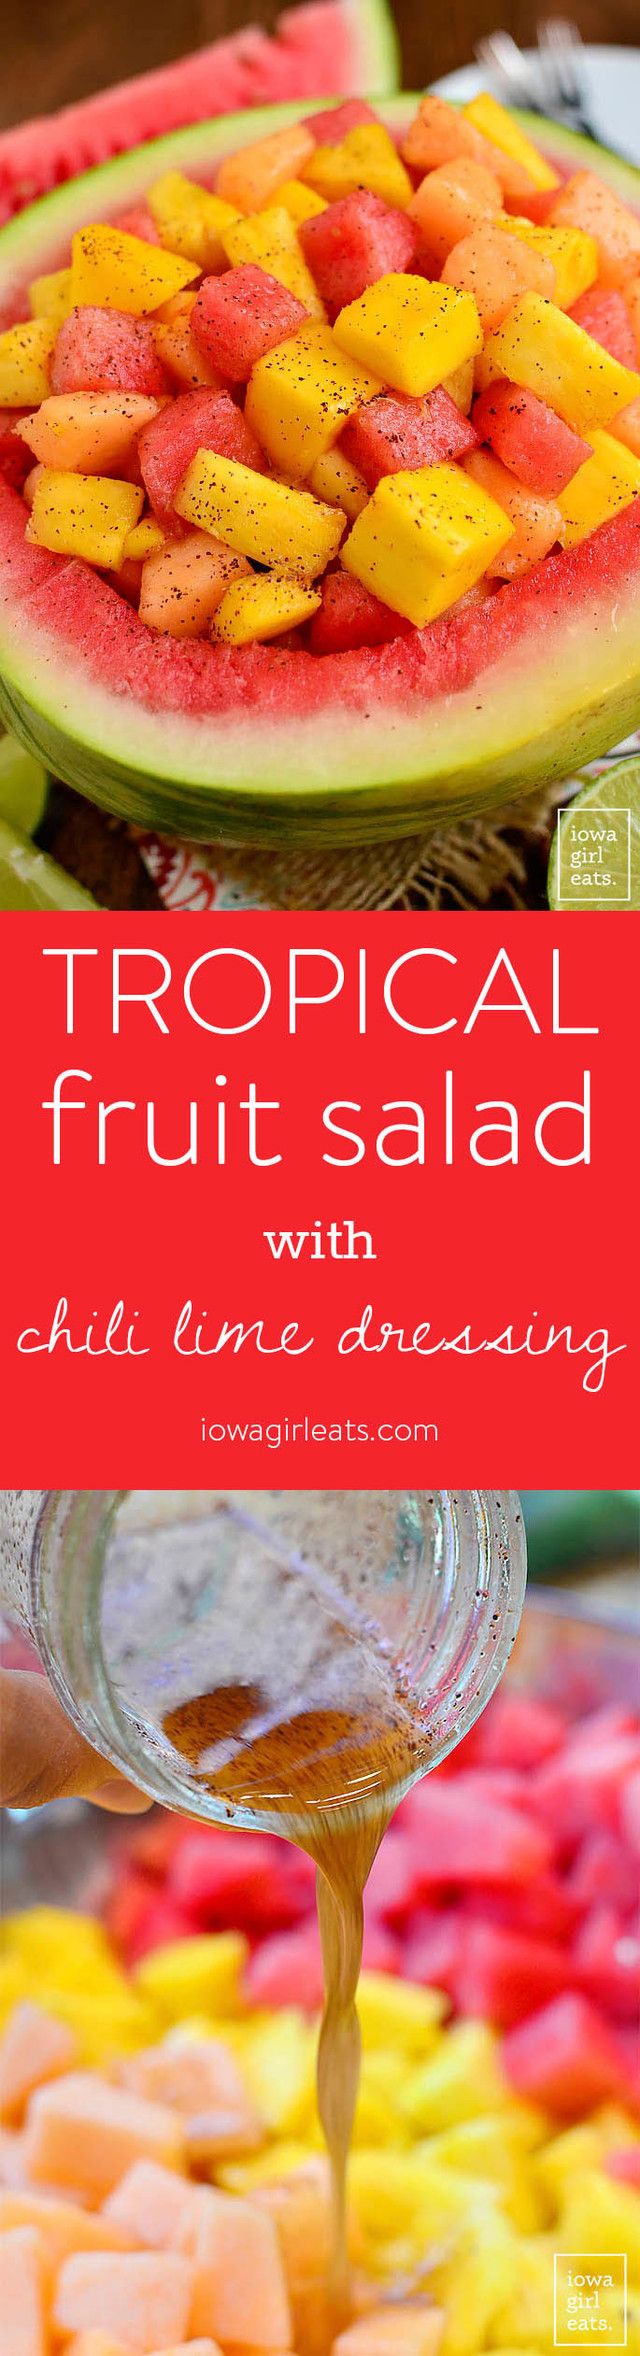 https://image.sistacafe.com/images/uploads/content_image/image/195076/1472536162-Tropical-Fruit-Salad-with-Chili-Lime-Dressing-iowagirleats-Vertical.jpg